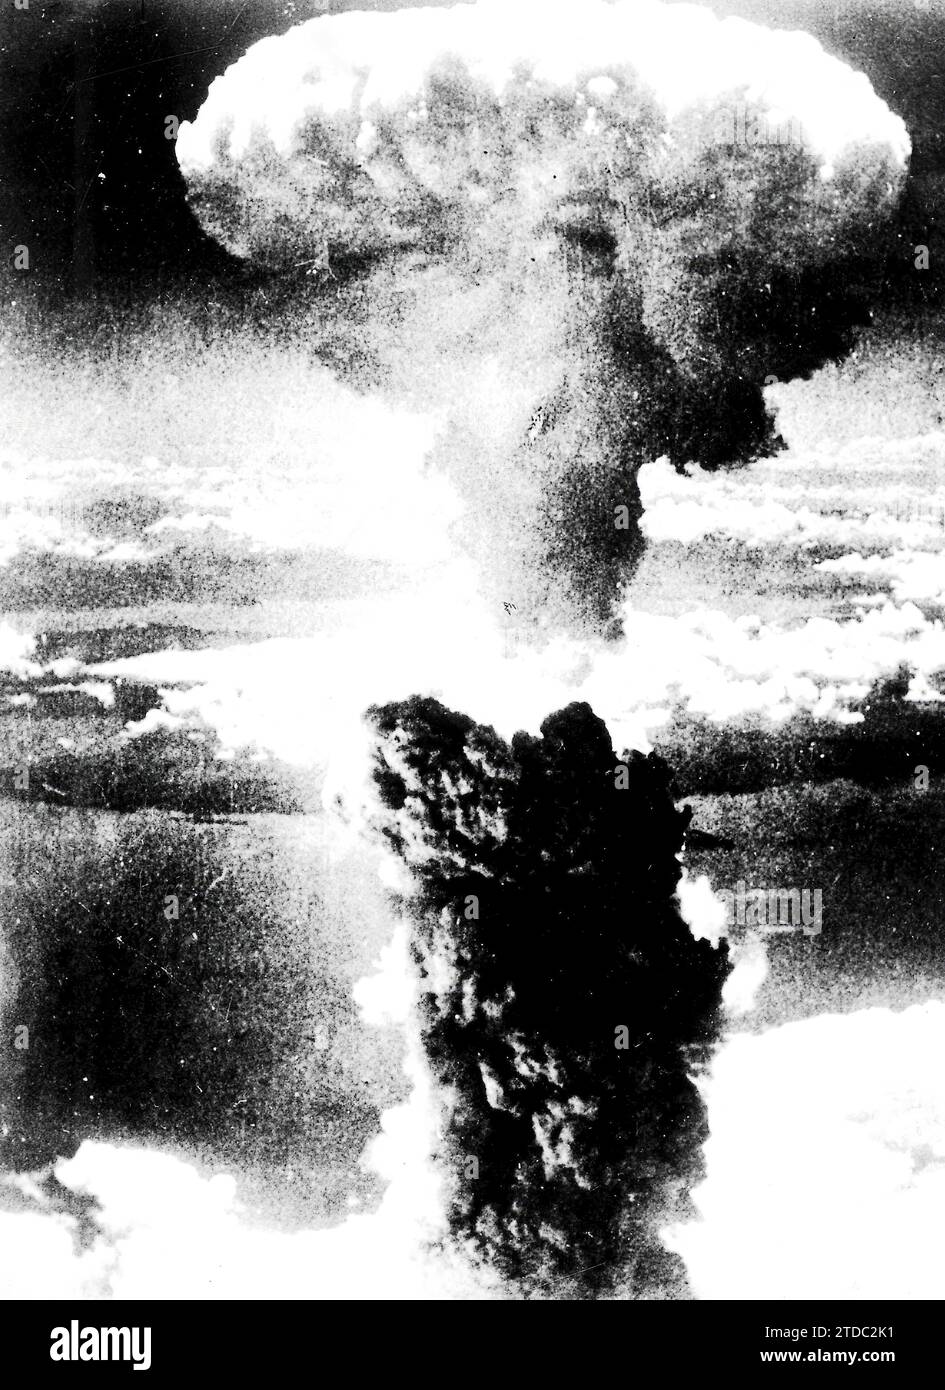 08/06/1945. The nuclear "mushroom" after the bomb explosion over Hiroshima. Credit: Album / Archivo ABC Stock Photo